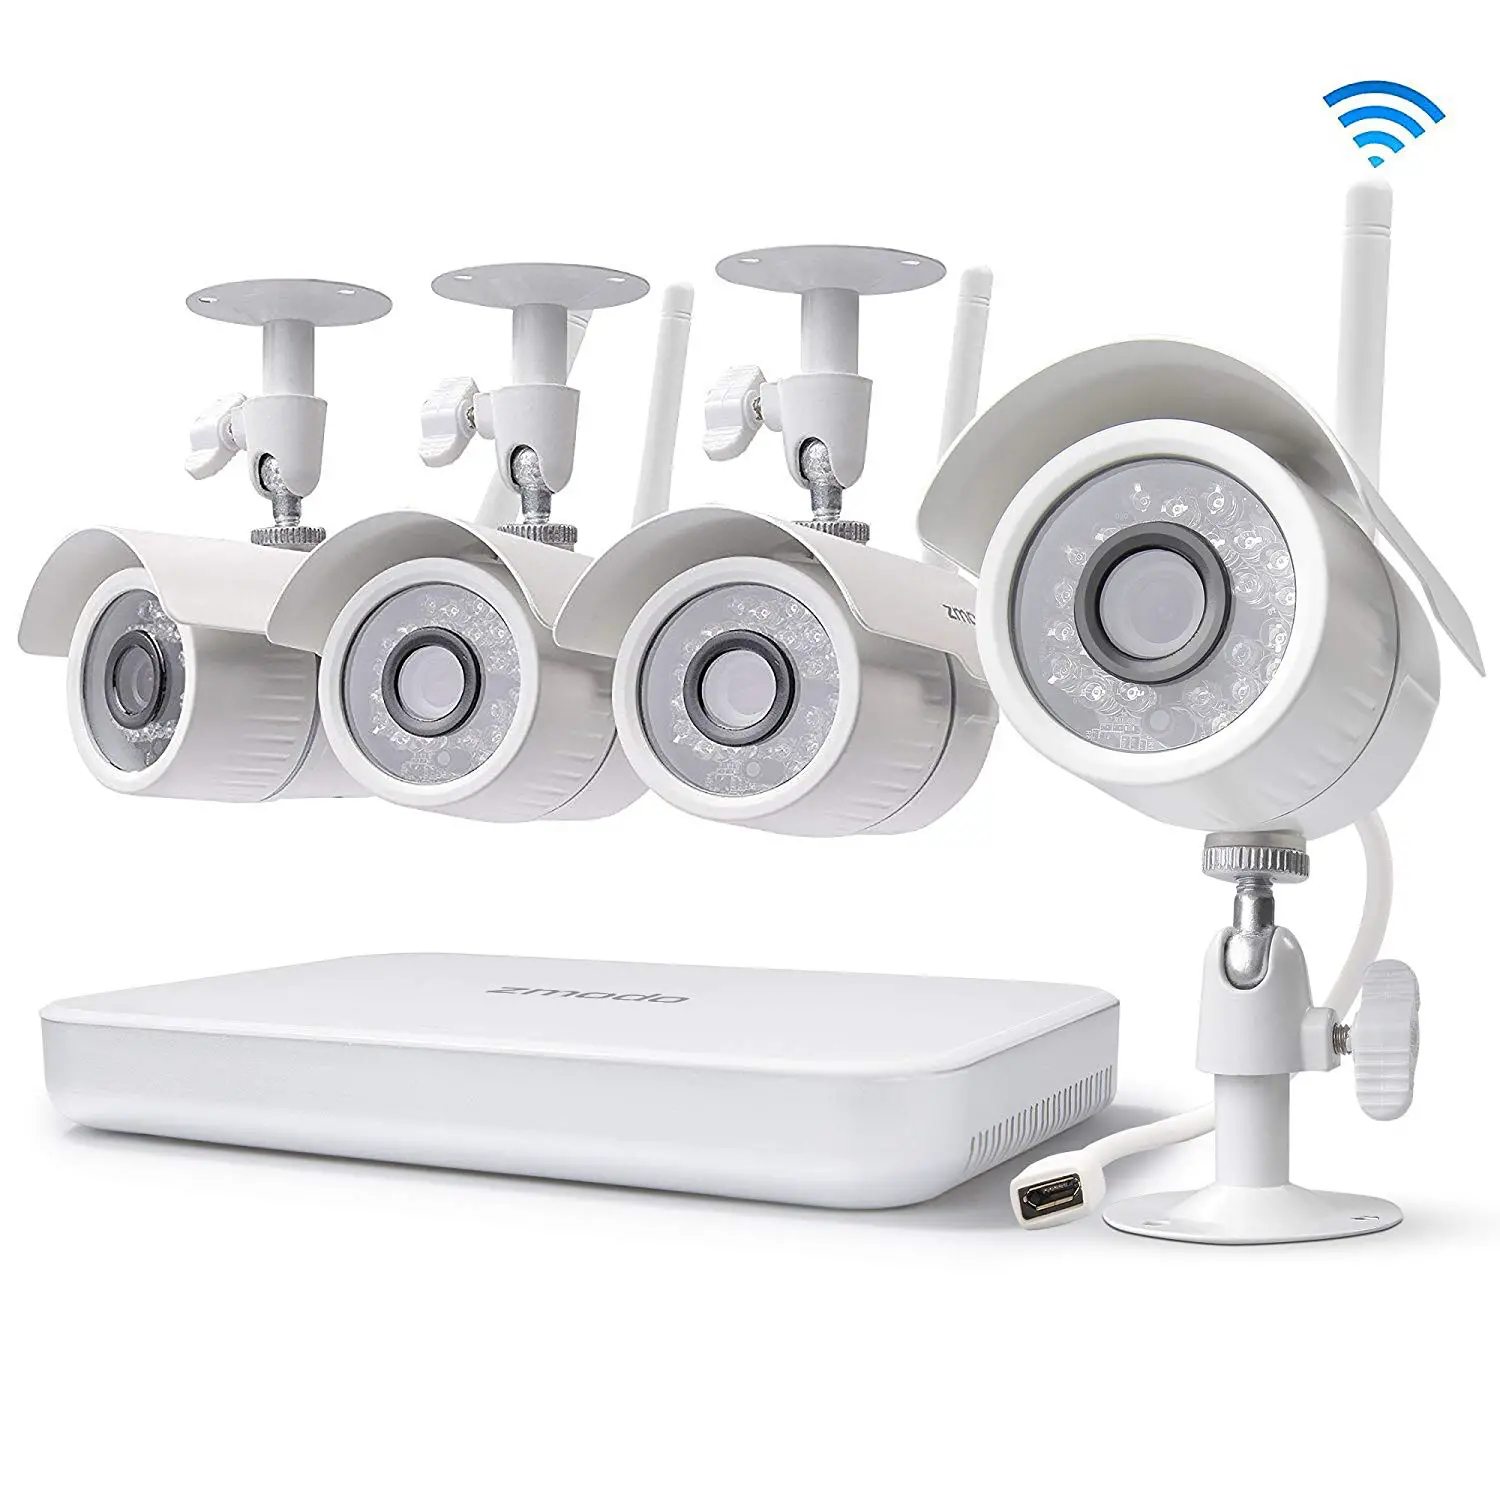 10 Best Outdoor Wireless Security Camera System With DVR